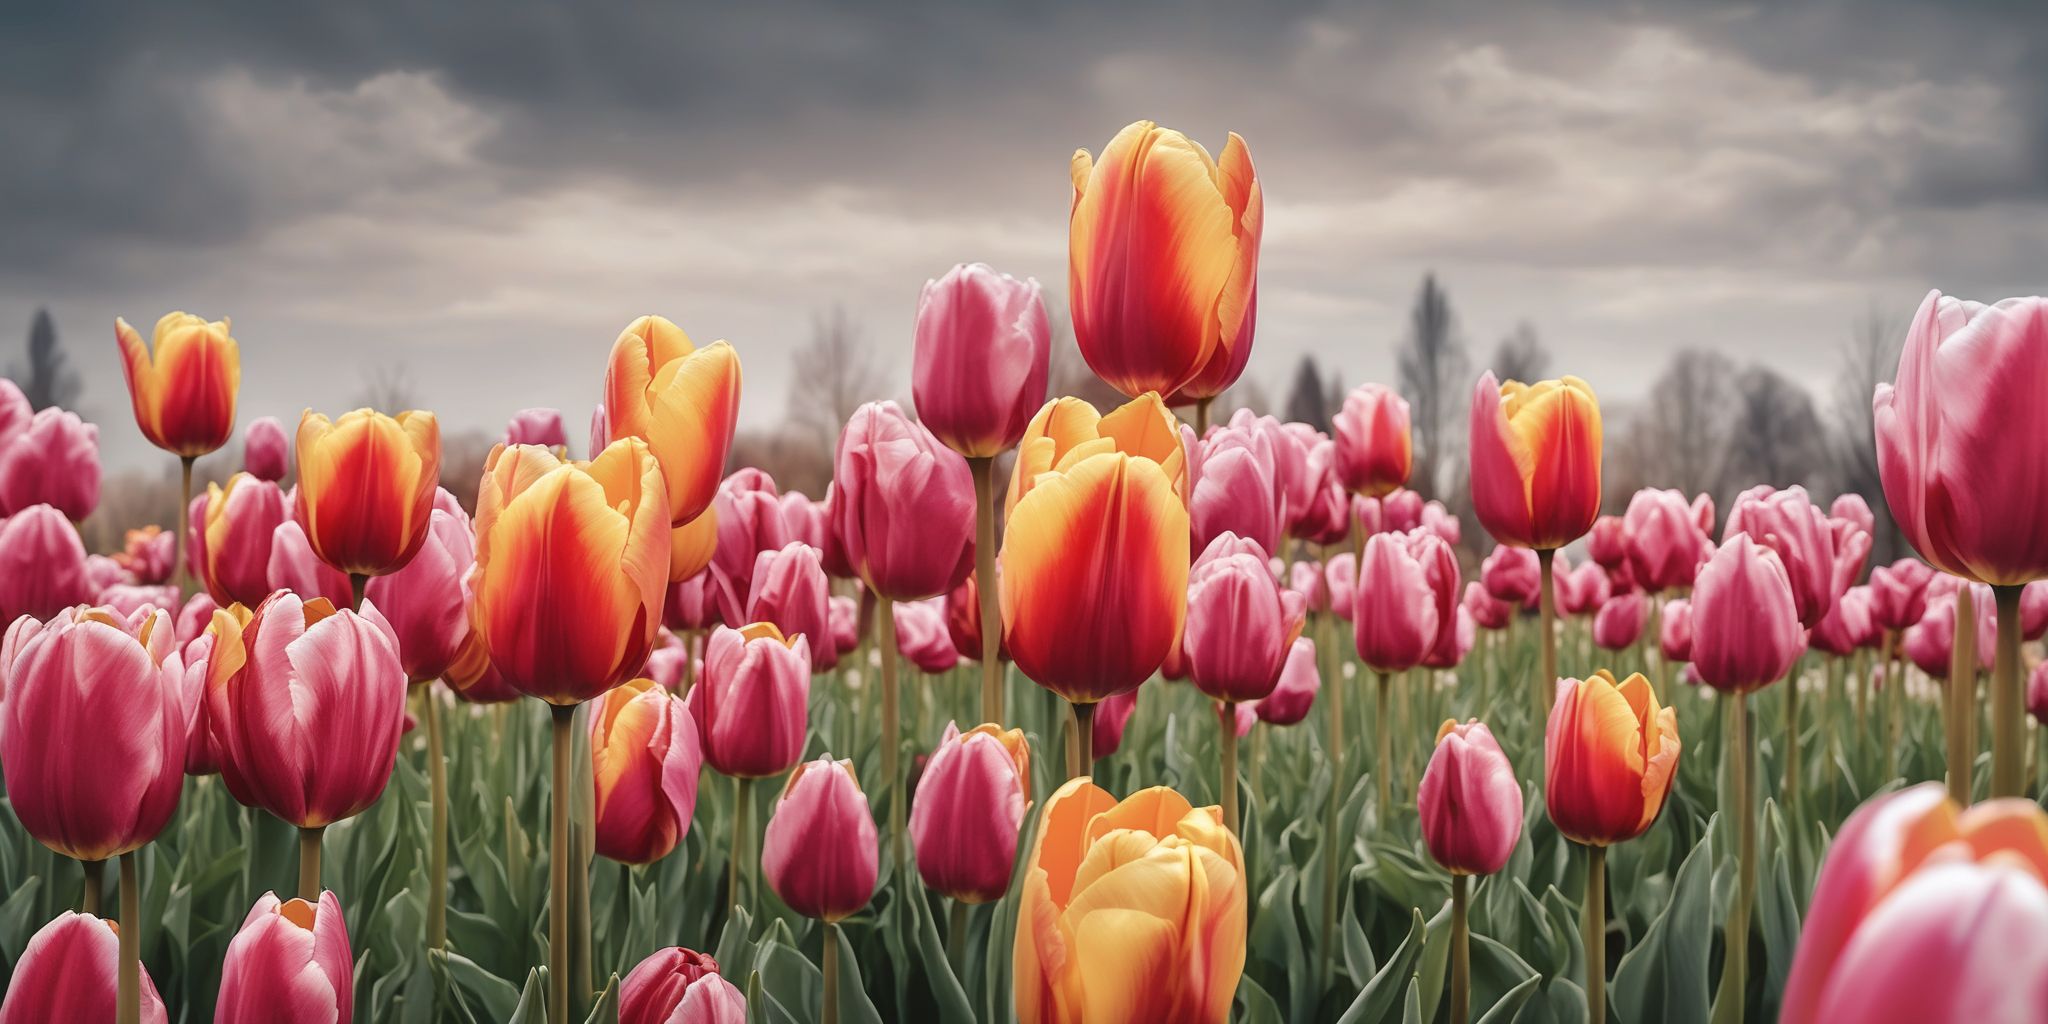 Tulip garden  in realistic, photographic style